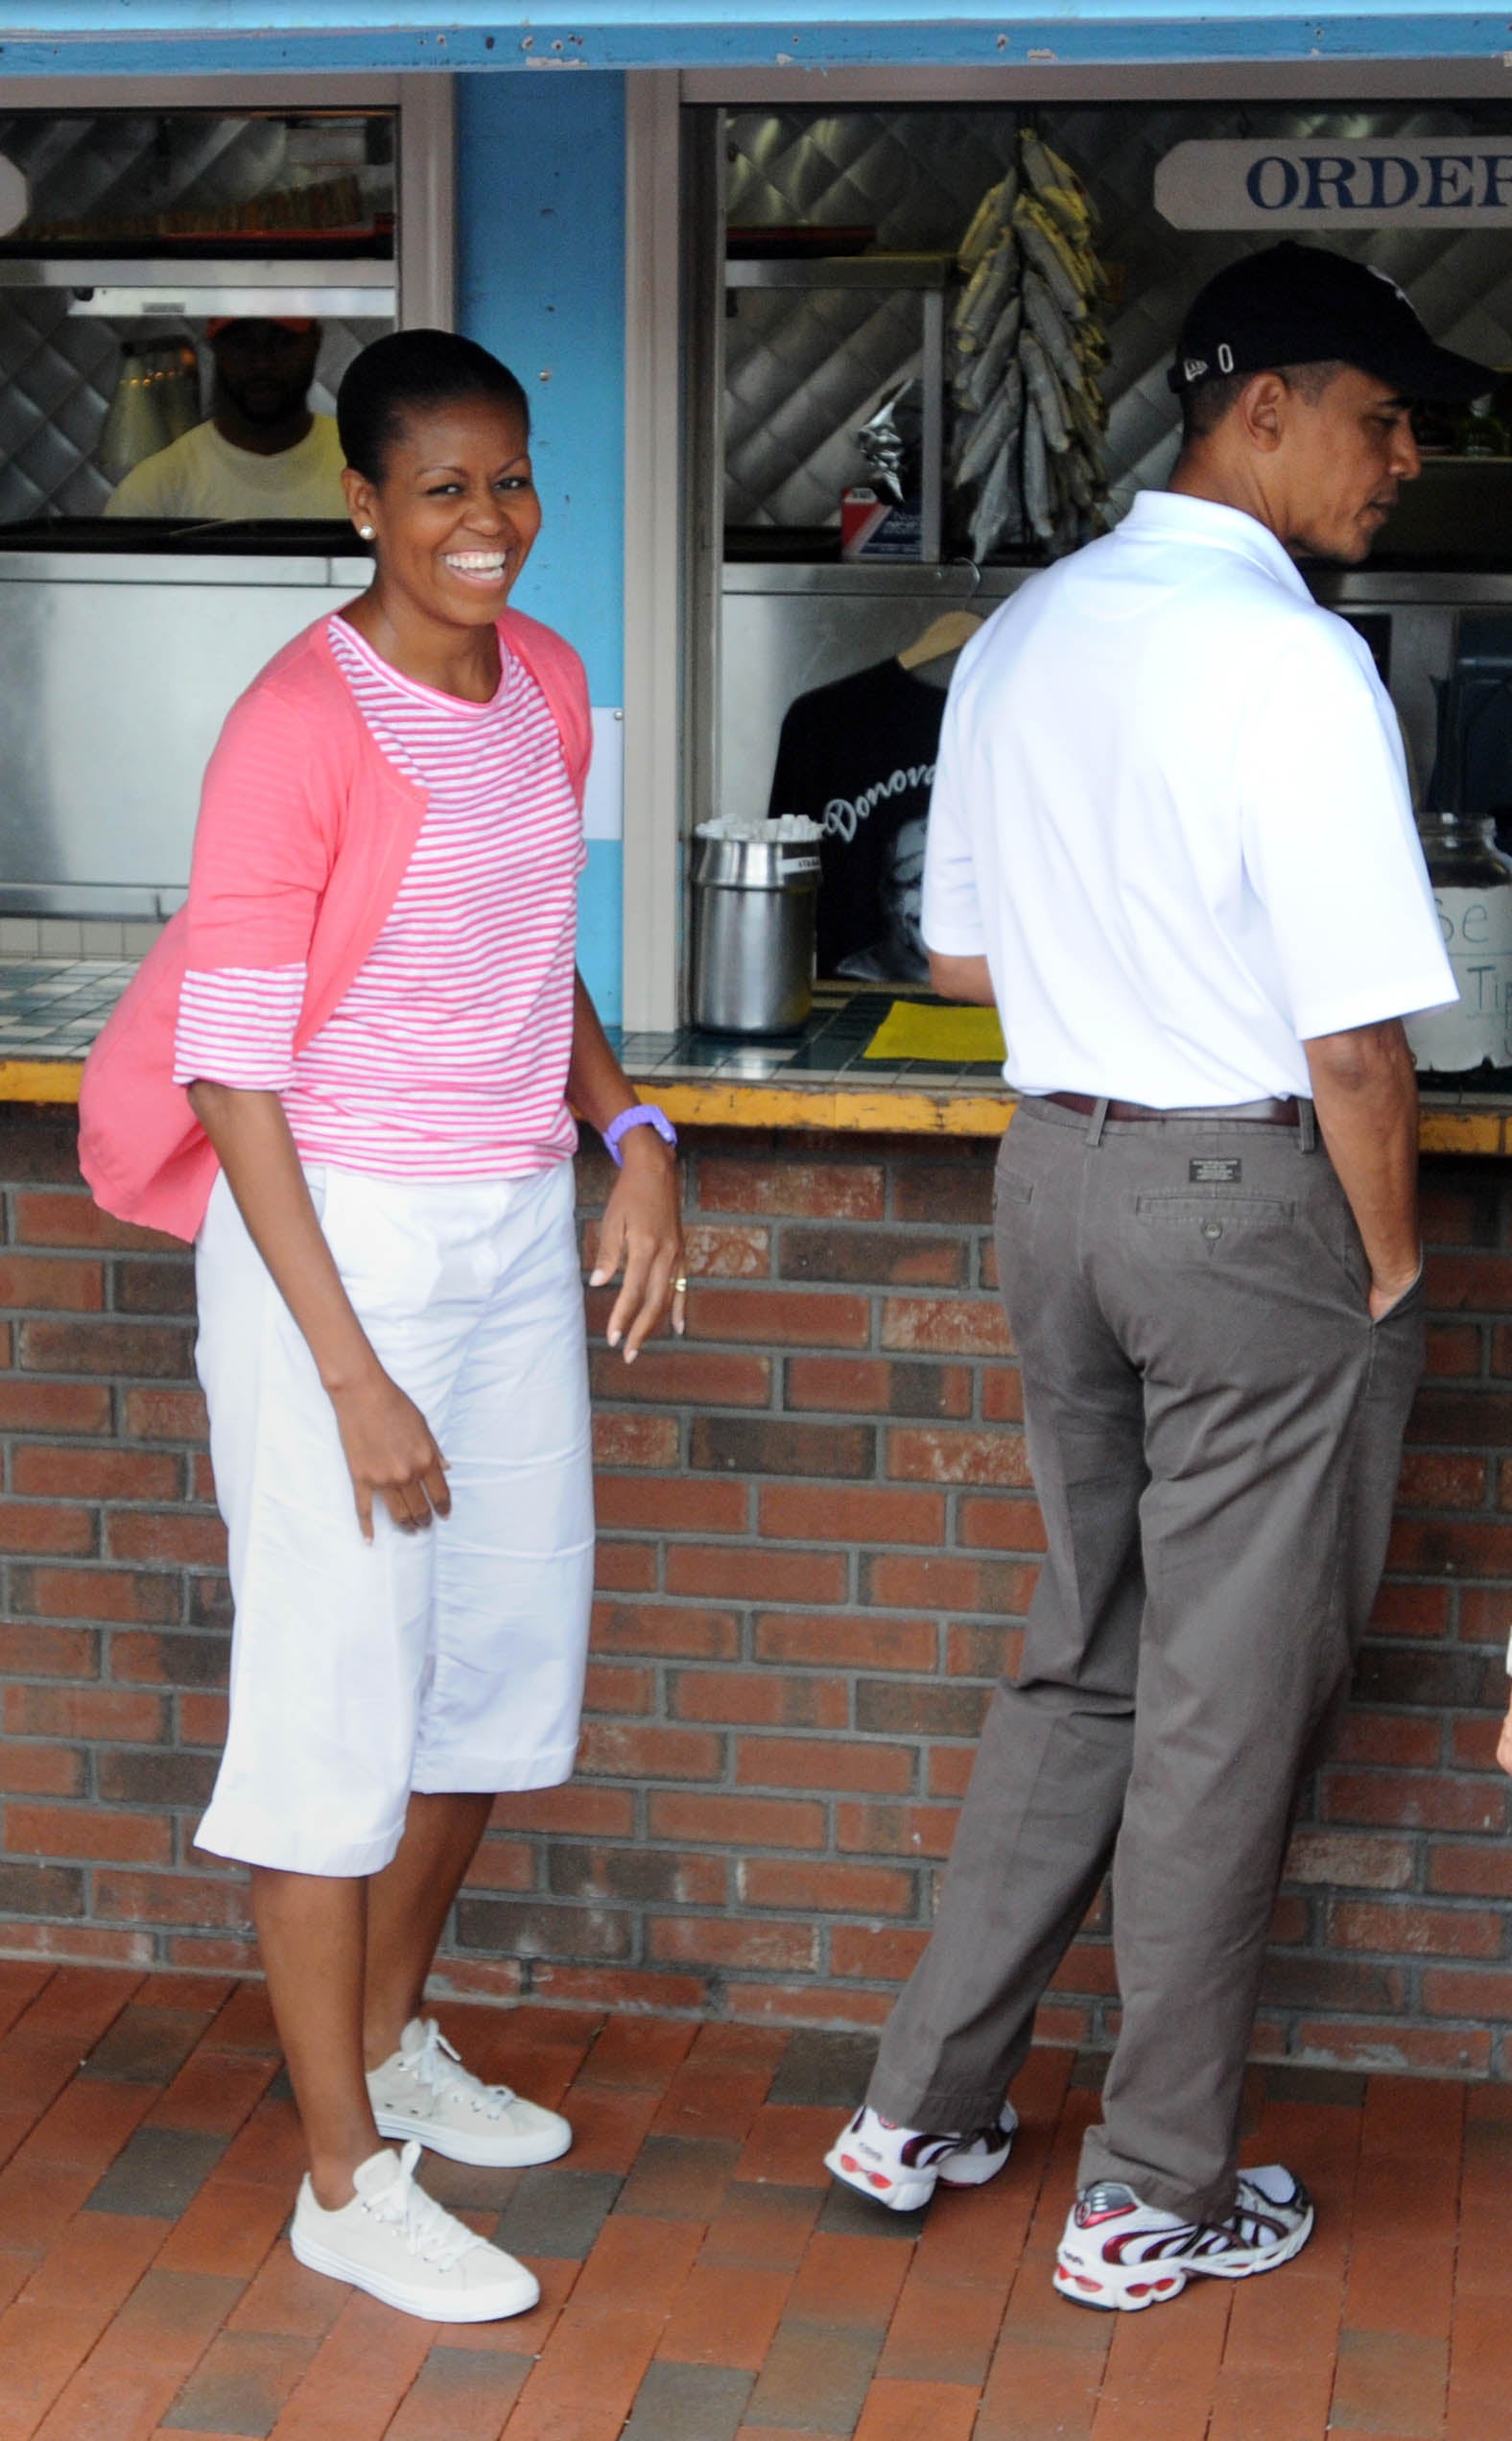 The Best Pics of The Obamas' Summers in Martha's Vineyard
